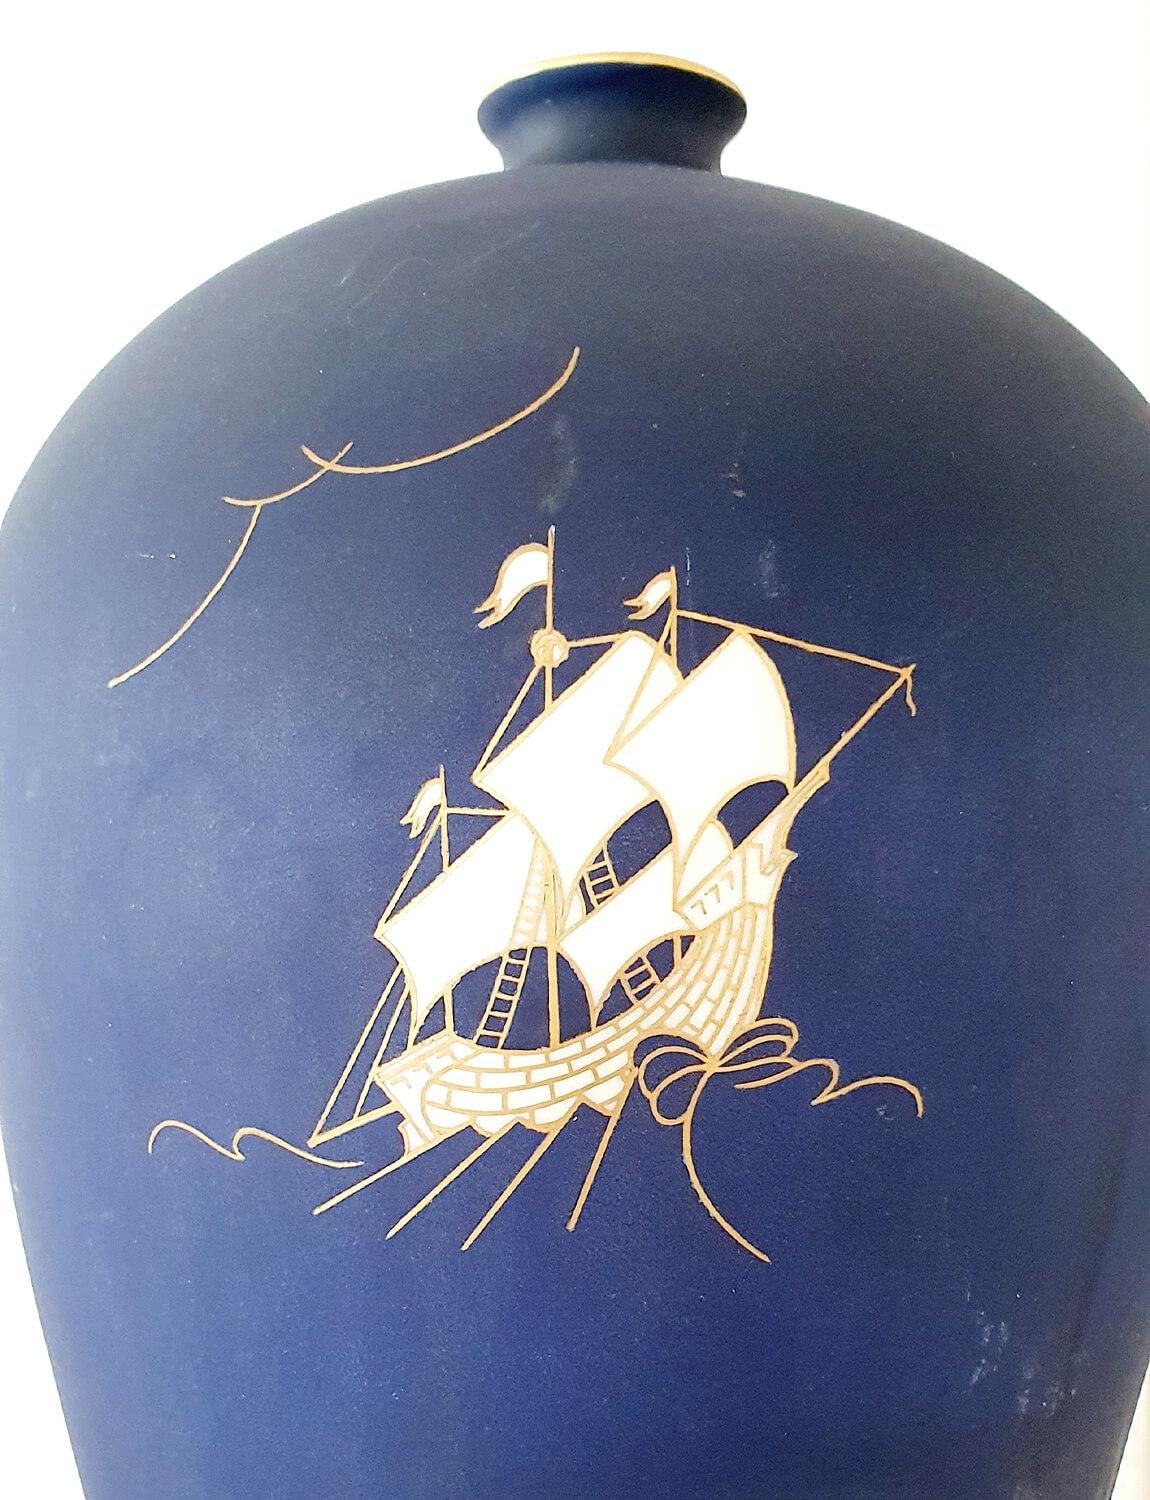 Exceptional large navy matt ceramic vase decorated with a hand-painted ship in gold and white and finished with a gold rim at the top. Signed and stamped Richard Ginori Pittoria di Doccia on the base. This vase was created under the direction of the